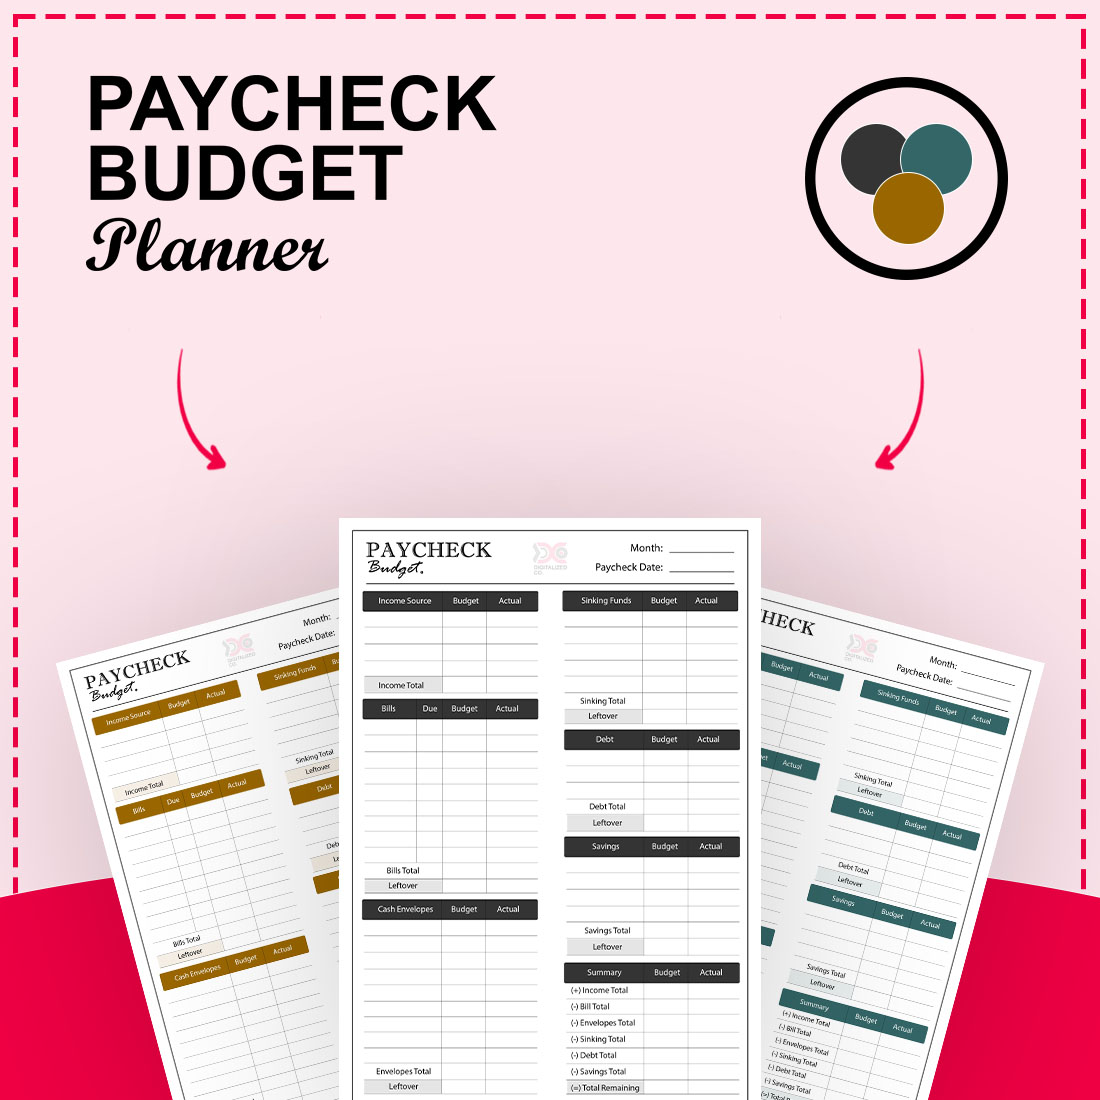 Paycheck Budget Planner cover image.